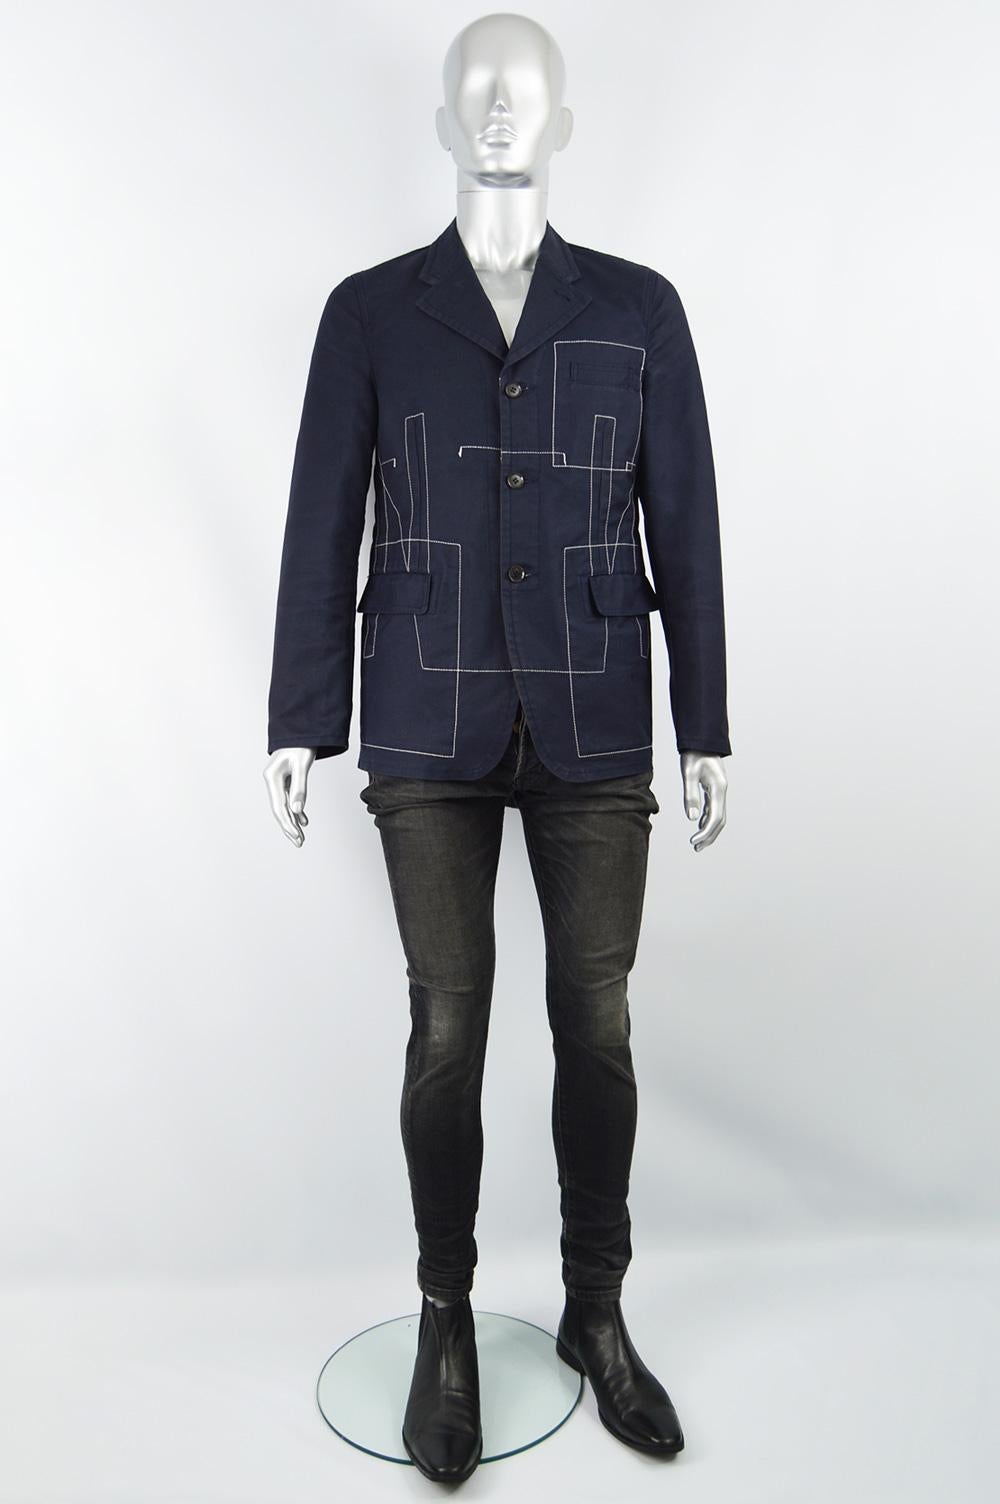 An excellent vintage men's jacket by iconic Japanese fashion label, Comme Des Garcons for their mens Homme Plus line. In a dark blue cotton blend with amazing white top stitching that gives an architectural / sculptural feel. This tailored jacket